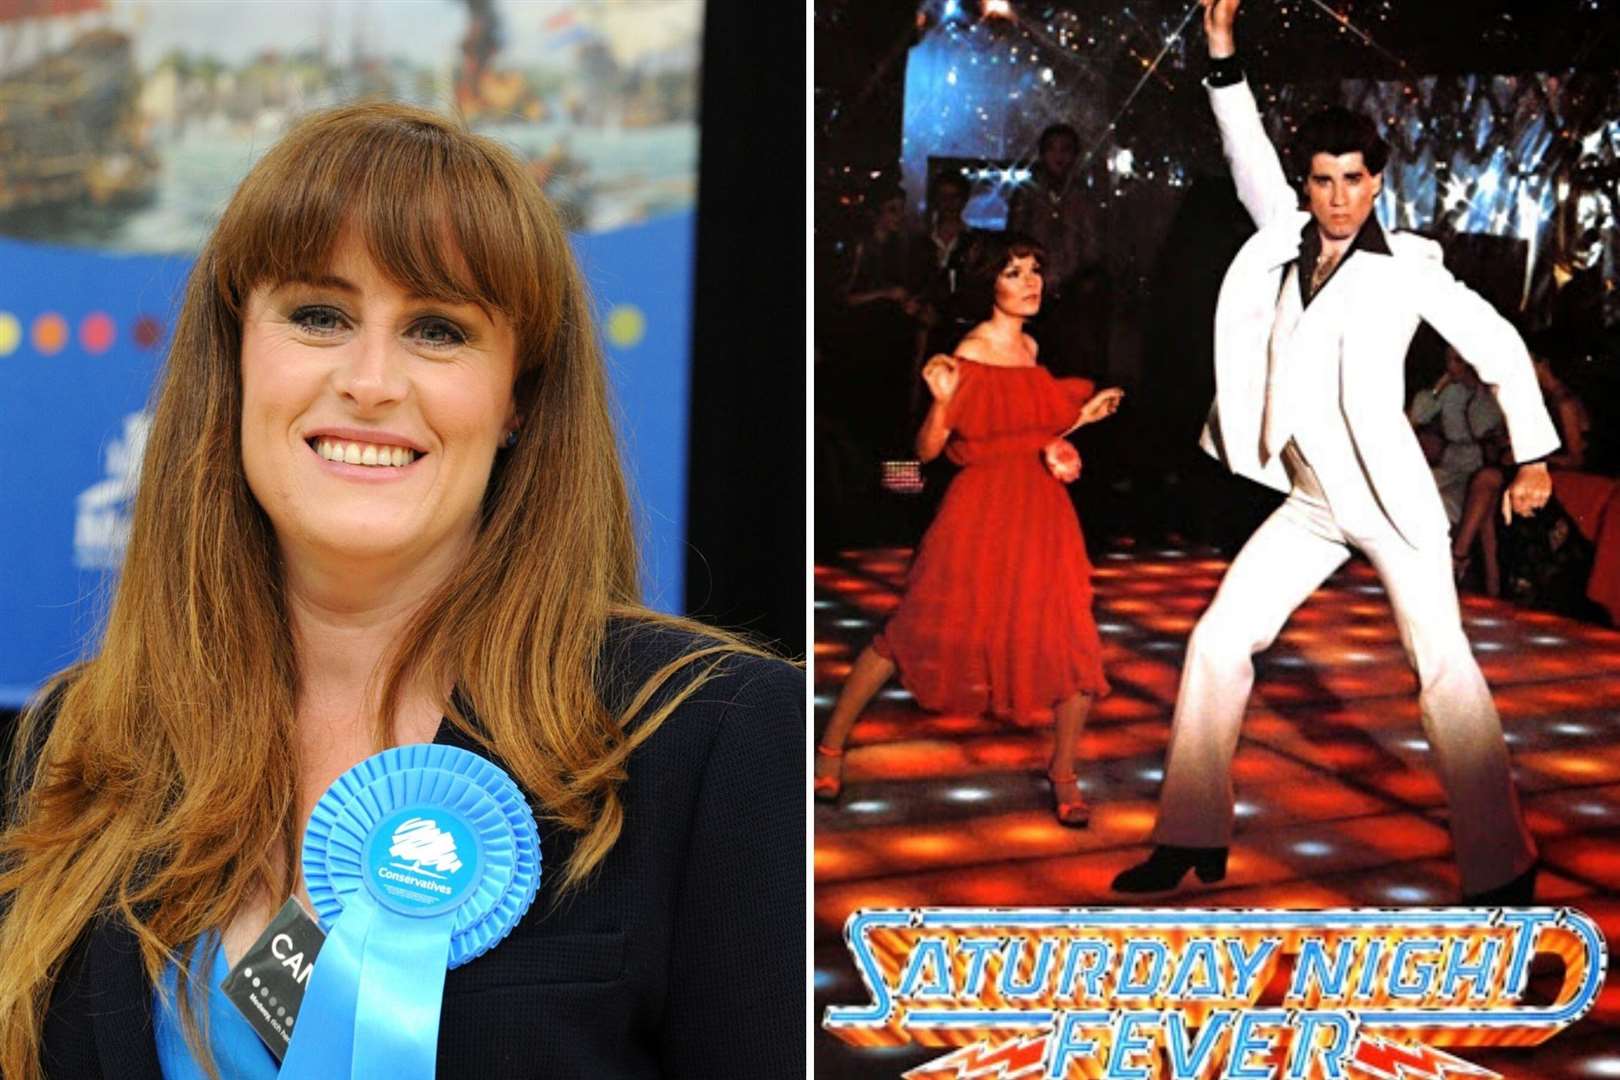 Rochester and Strood MP Kelly Tolhurst: Saturday Night Fever (1977)